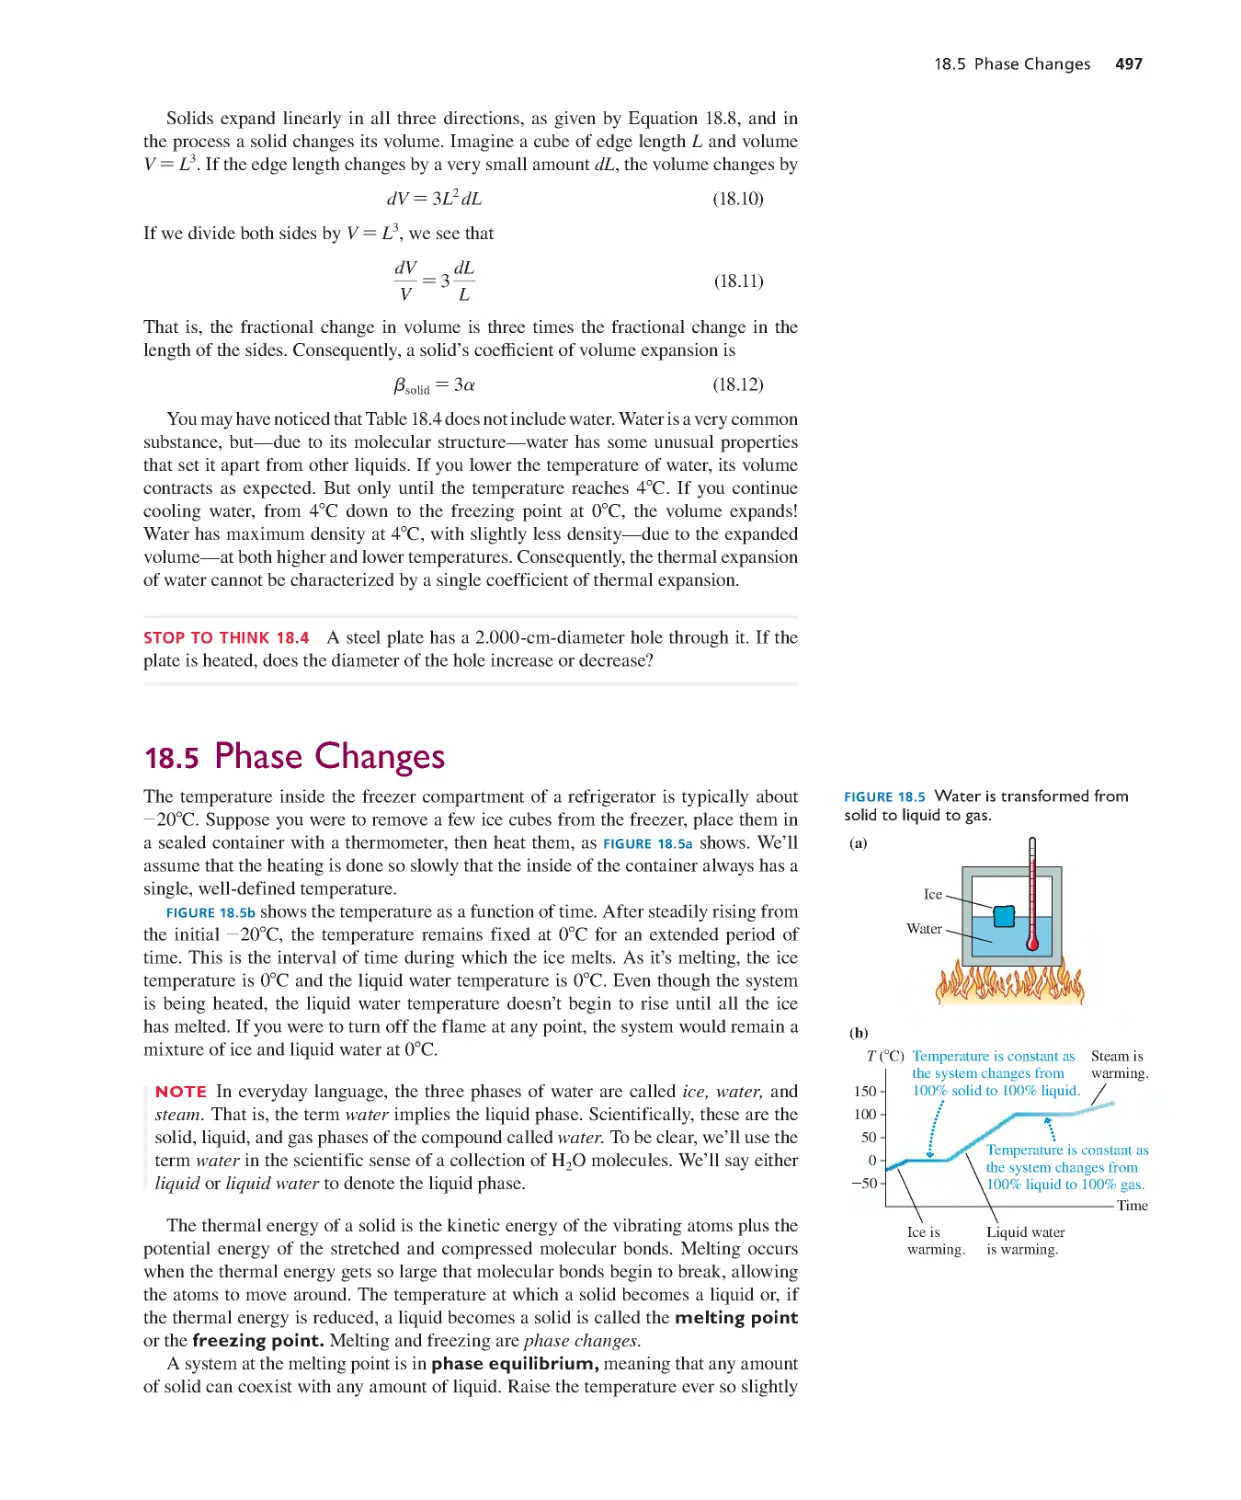 18.5. Phase Changes